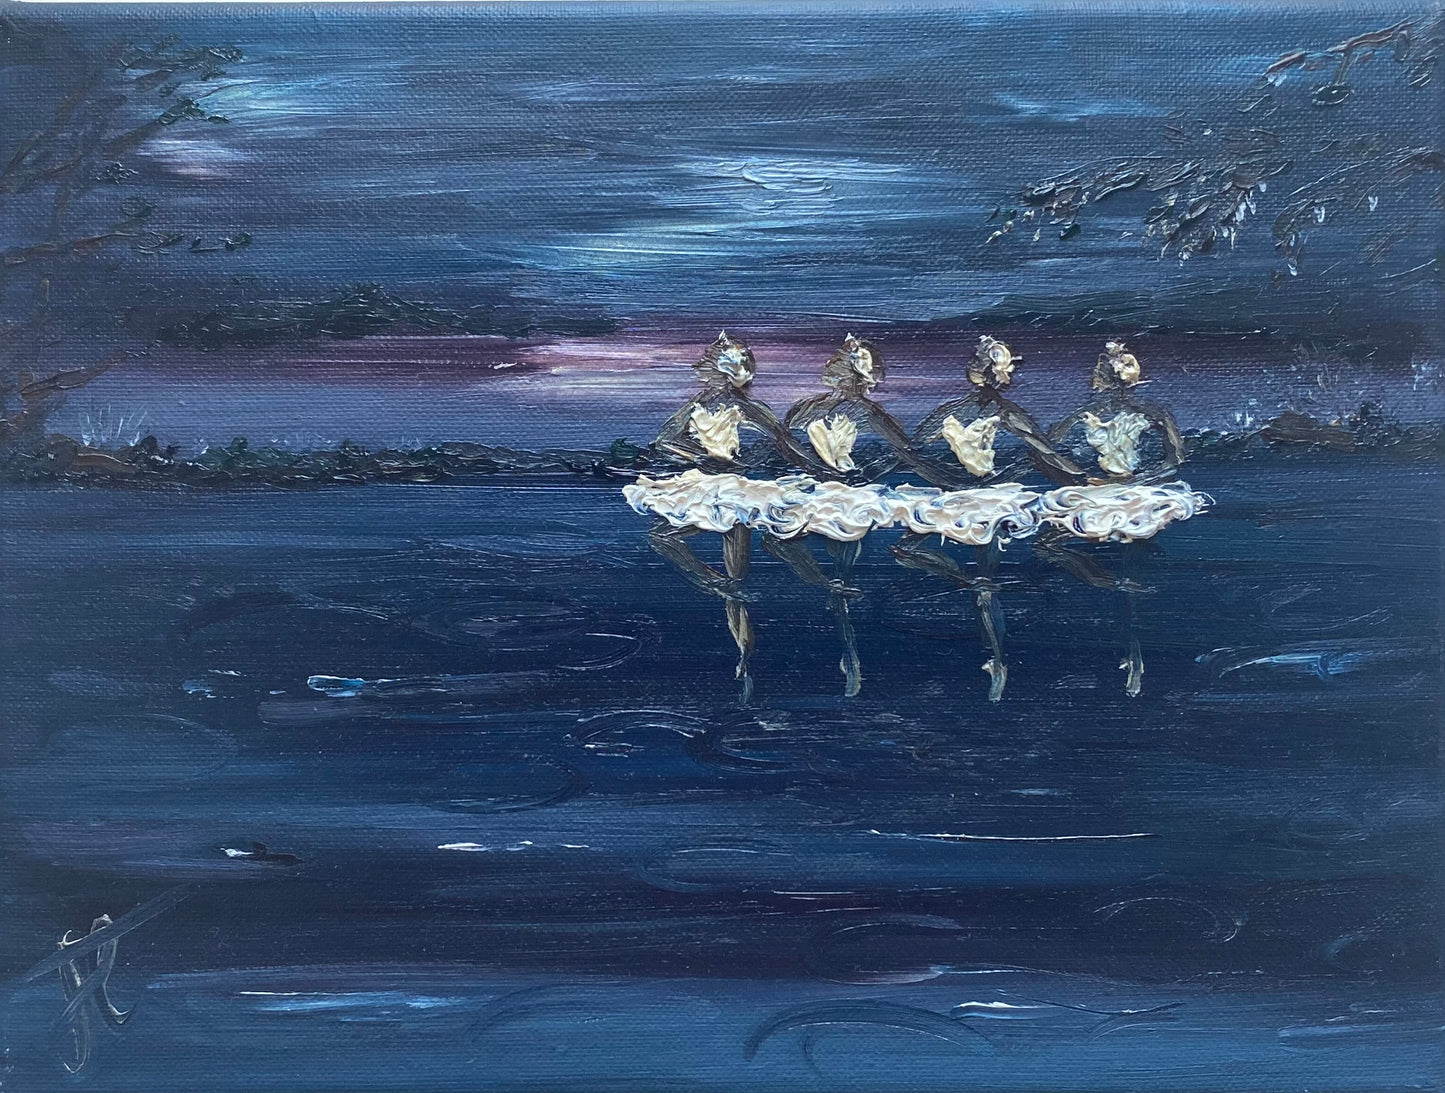 Oil painting of four ballerinas performing the dance of the little swans. The painting has a blue and purple background. It is visibly textured.